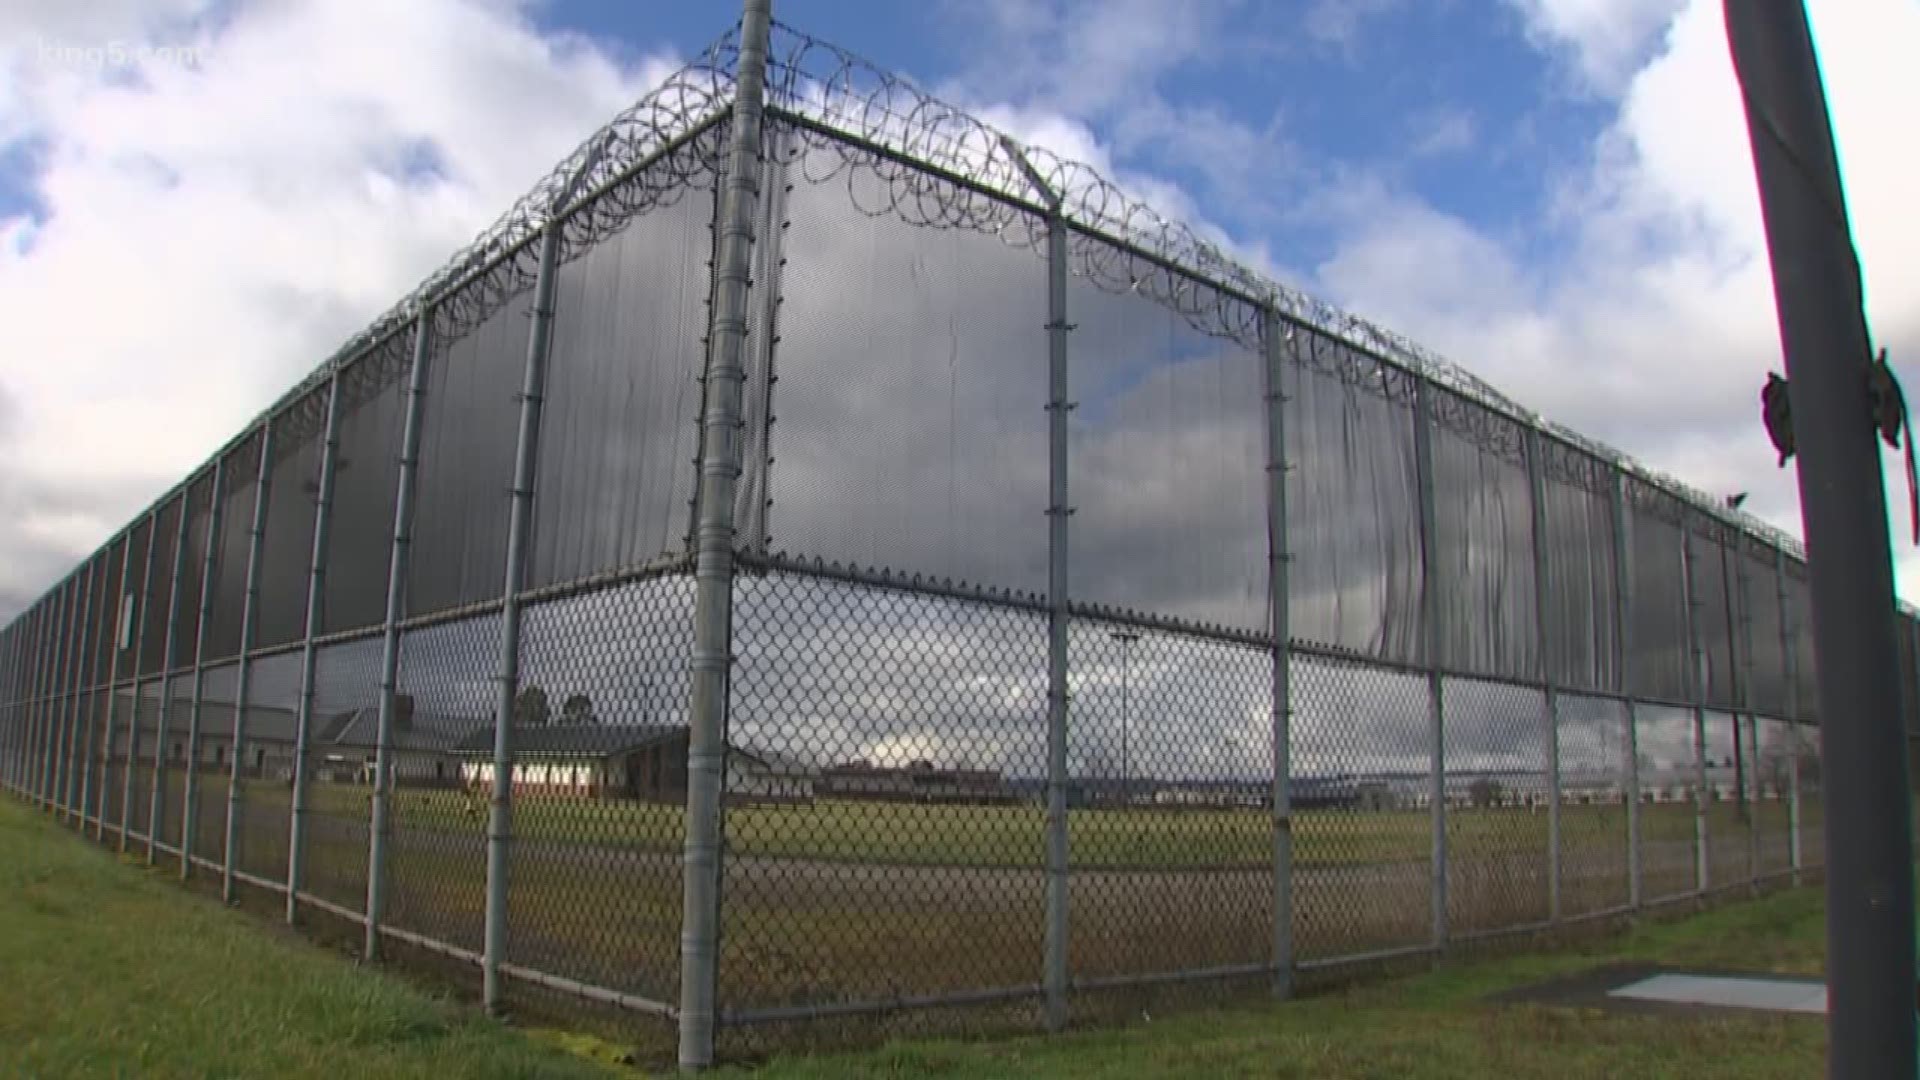 A KING 5 investigation revealed staff members at a Washington state maximum-security juvenile lockup are often the targets of attacks.